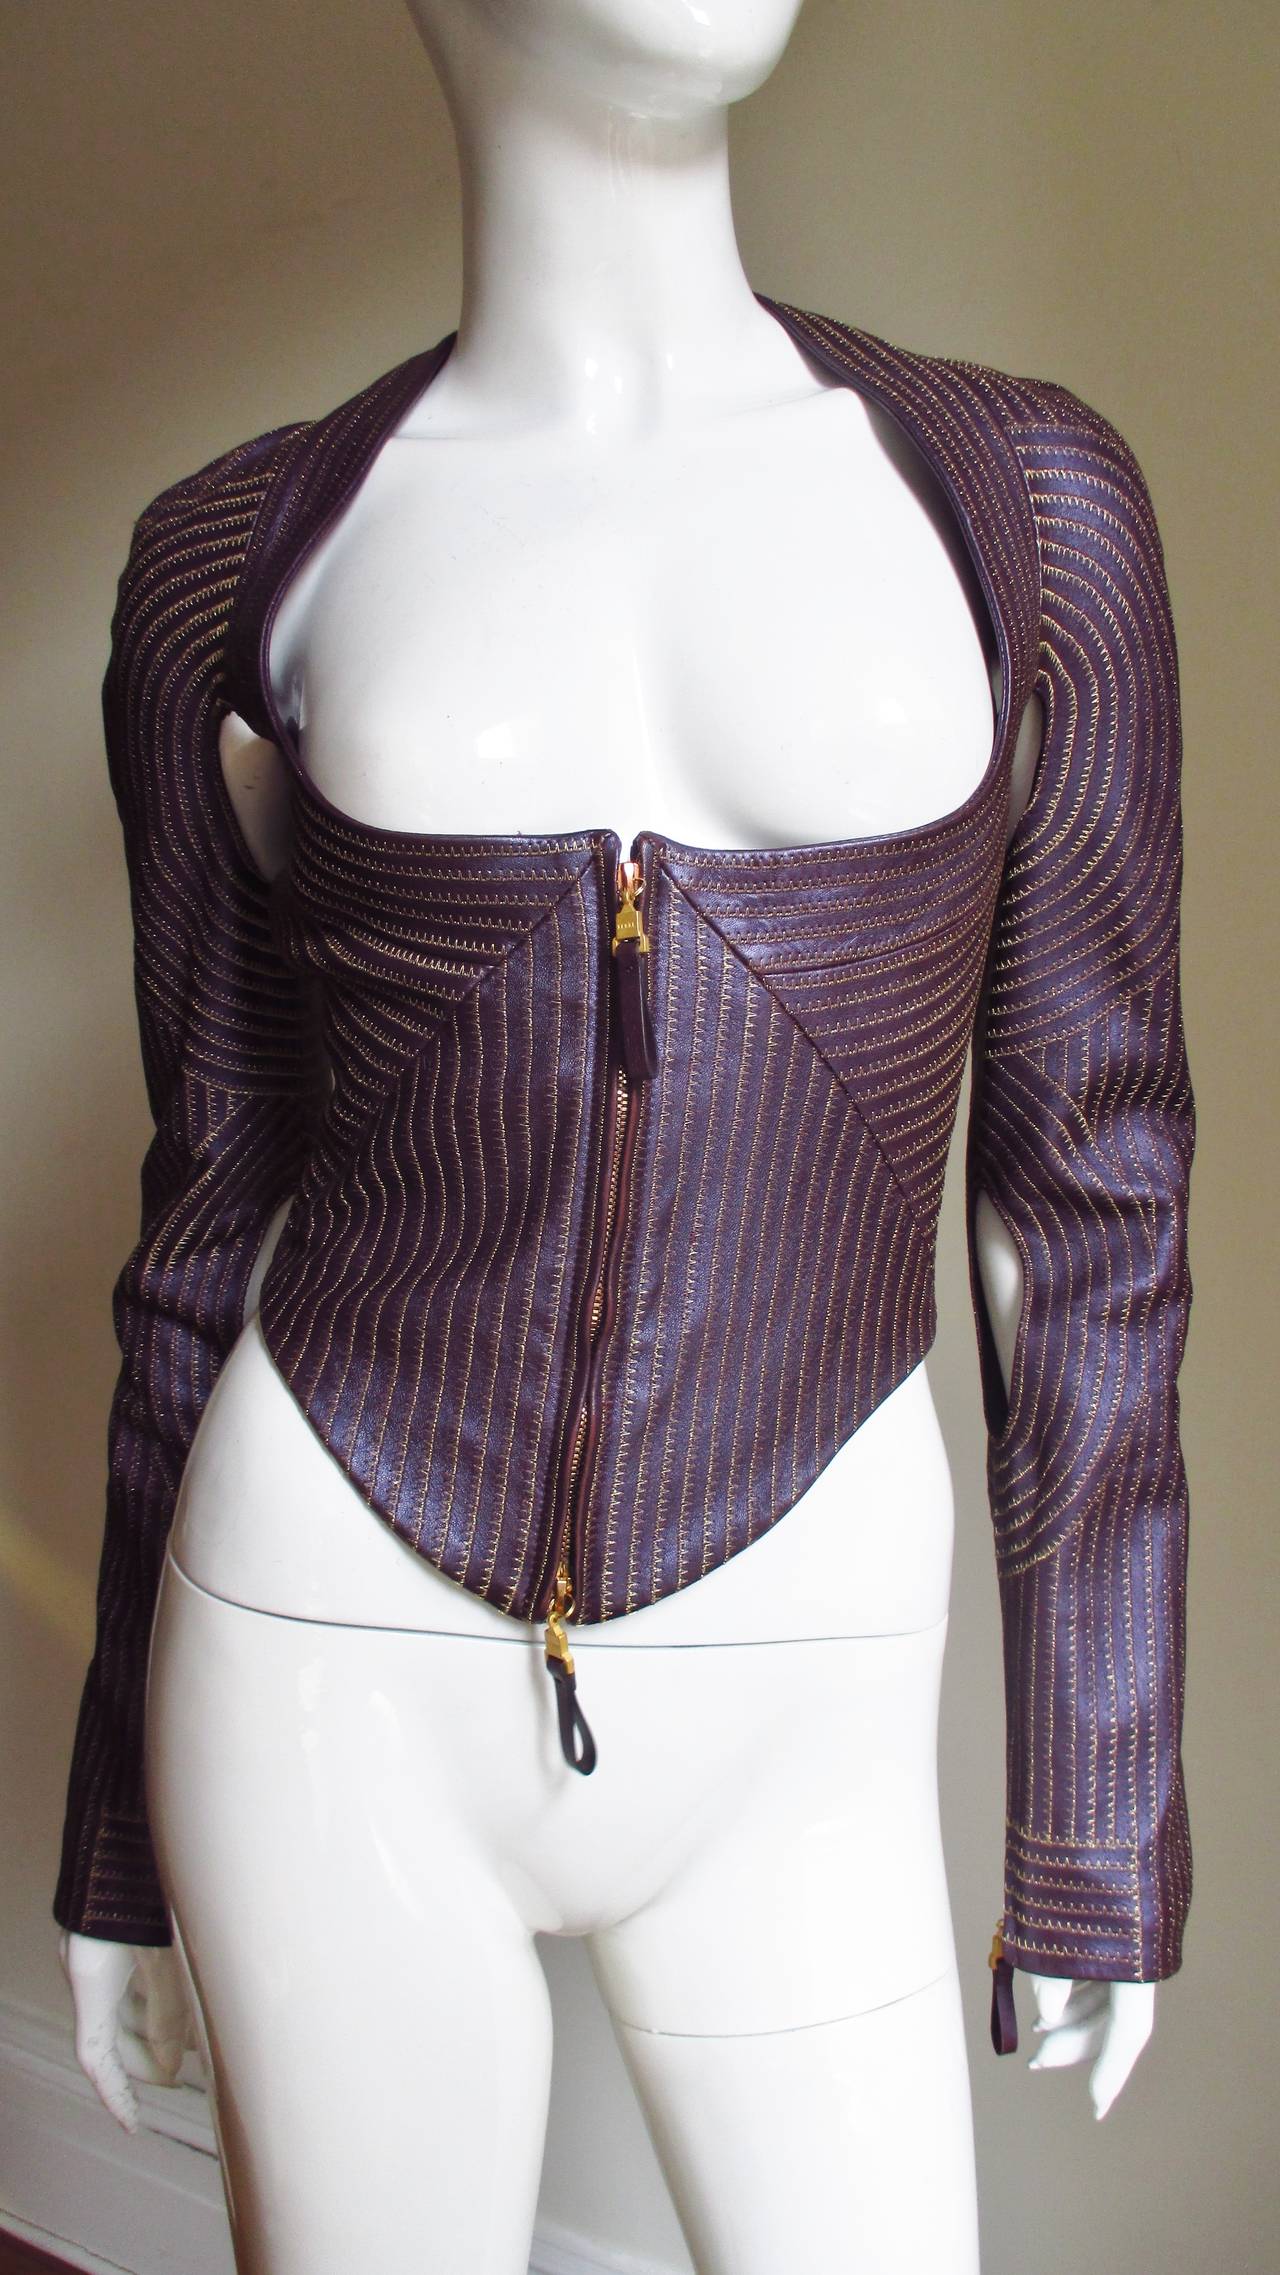 An incredible purple fine leather jacket from Gianfranco Ferre with rows of gold top stitching throughout-  very detailed.  It is fitted with a wide deep scoop neck, long slim sleeves with cutouts under the arms and at the inner elbow, and it is